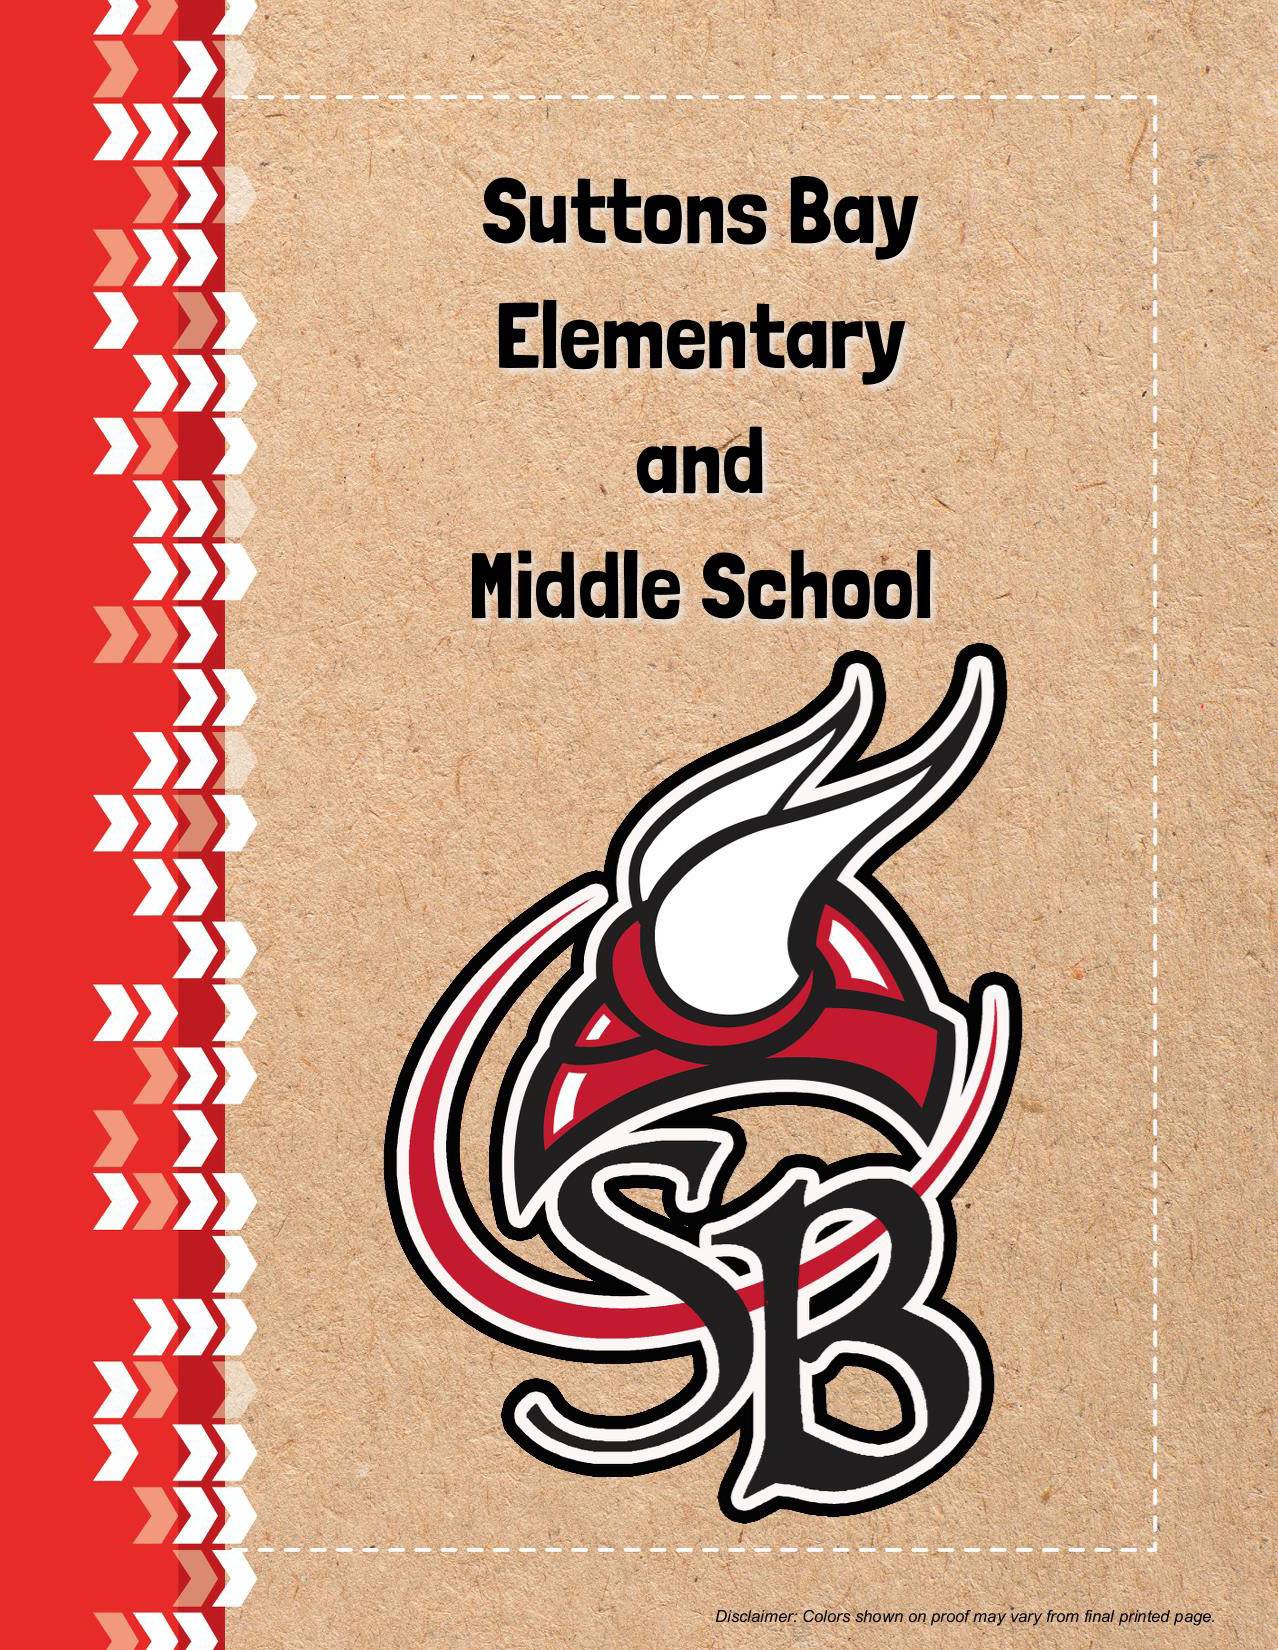 SUTTONS BAY YEARBOOK COVER